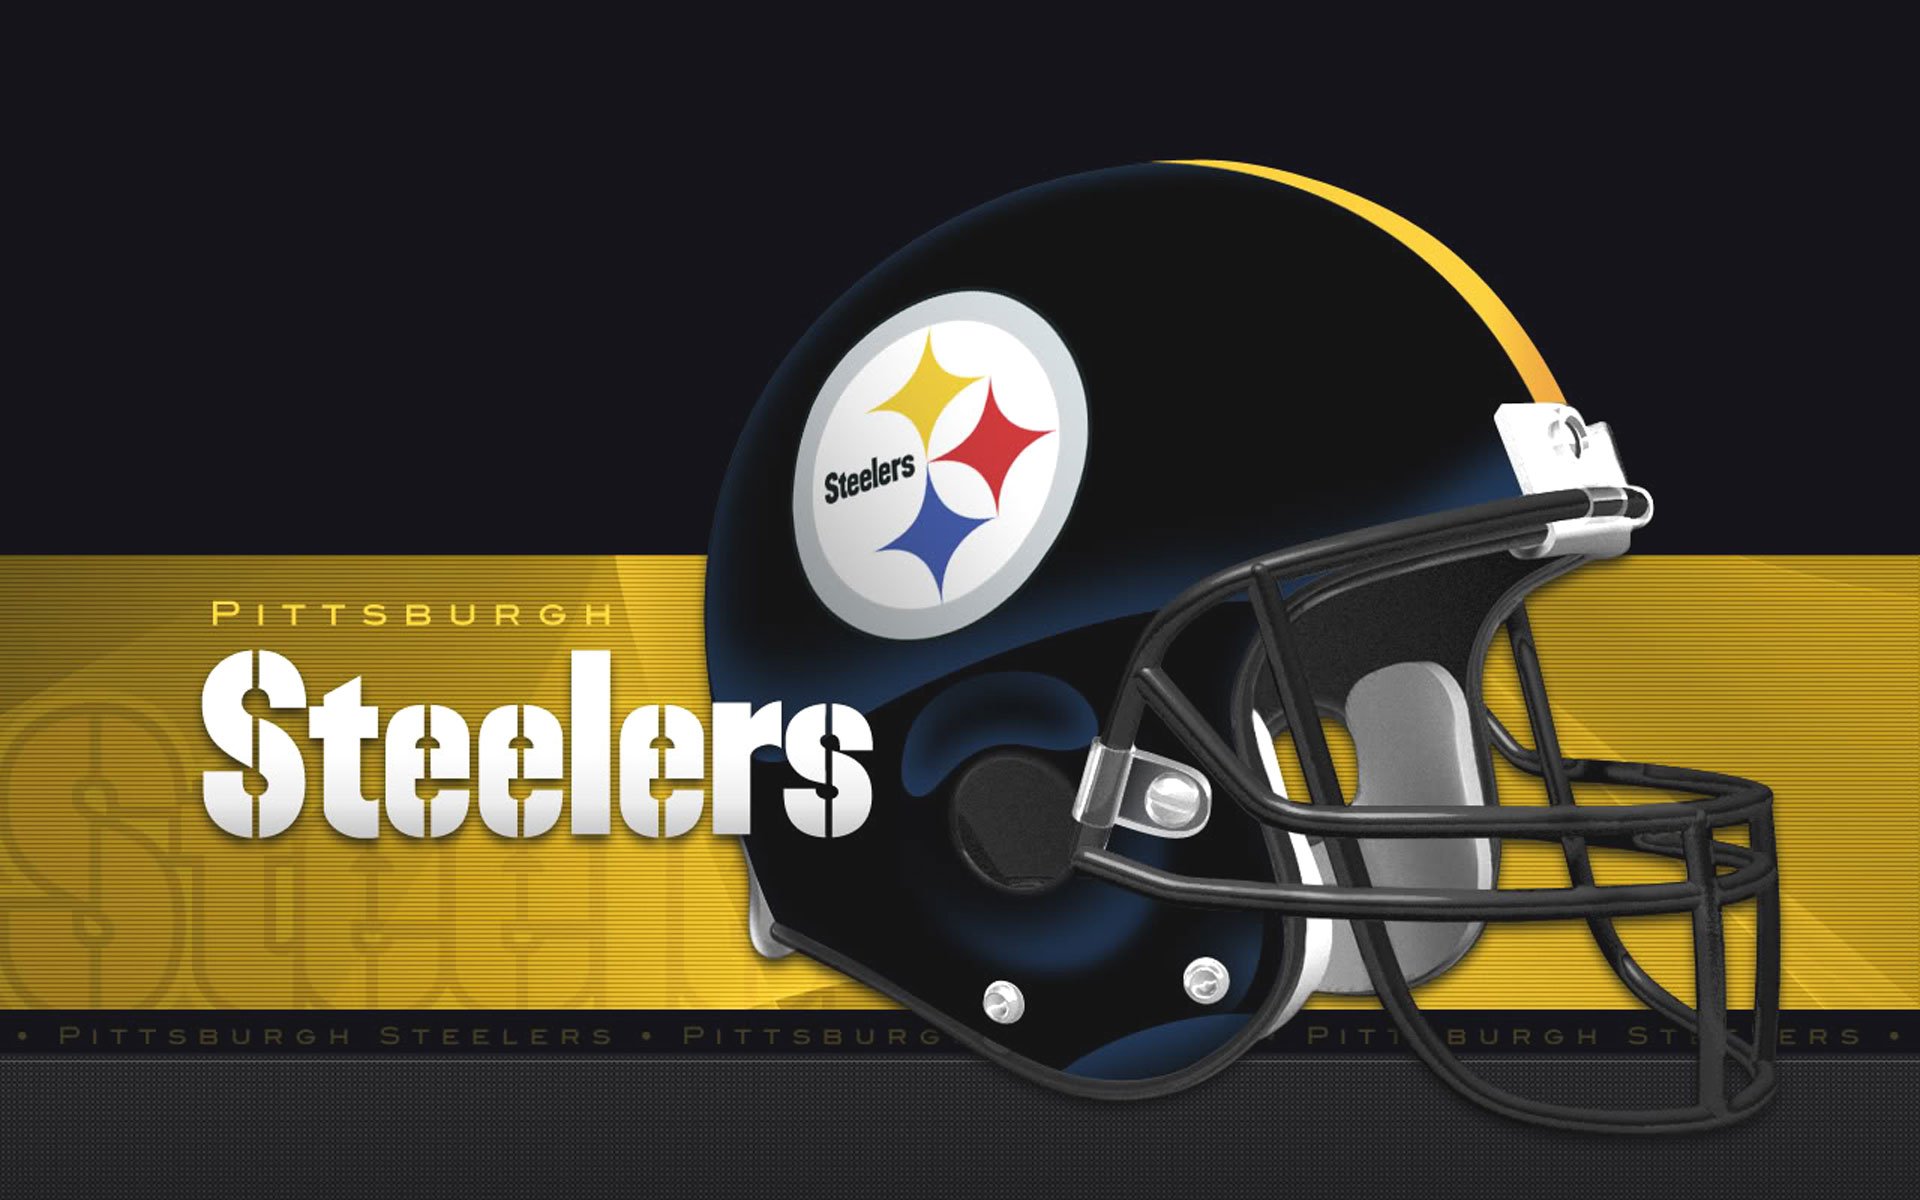  day Pittsburgh Steelers wallpaper Pittsburgh Steelers wallpapers 1920x1200